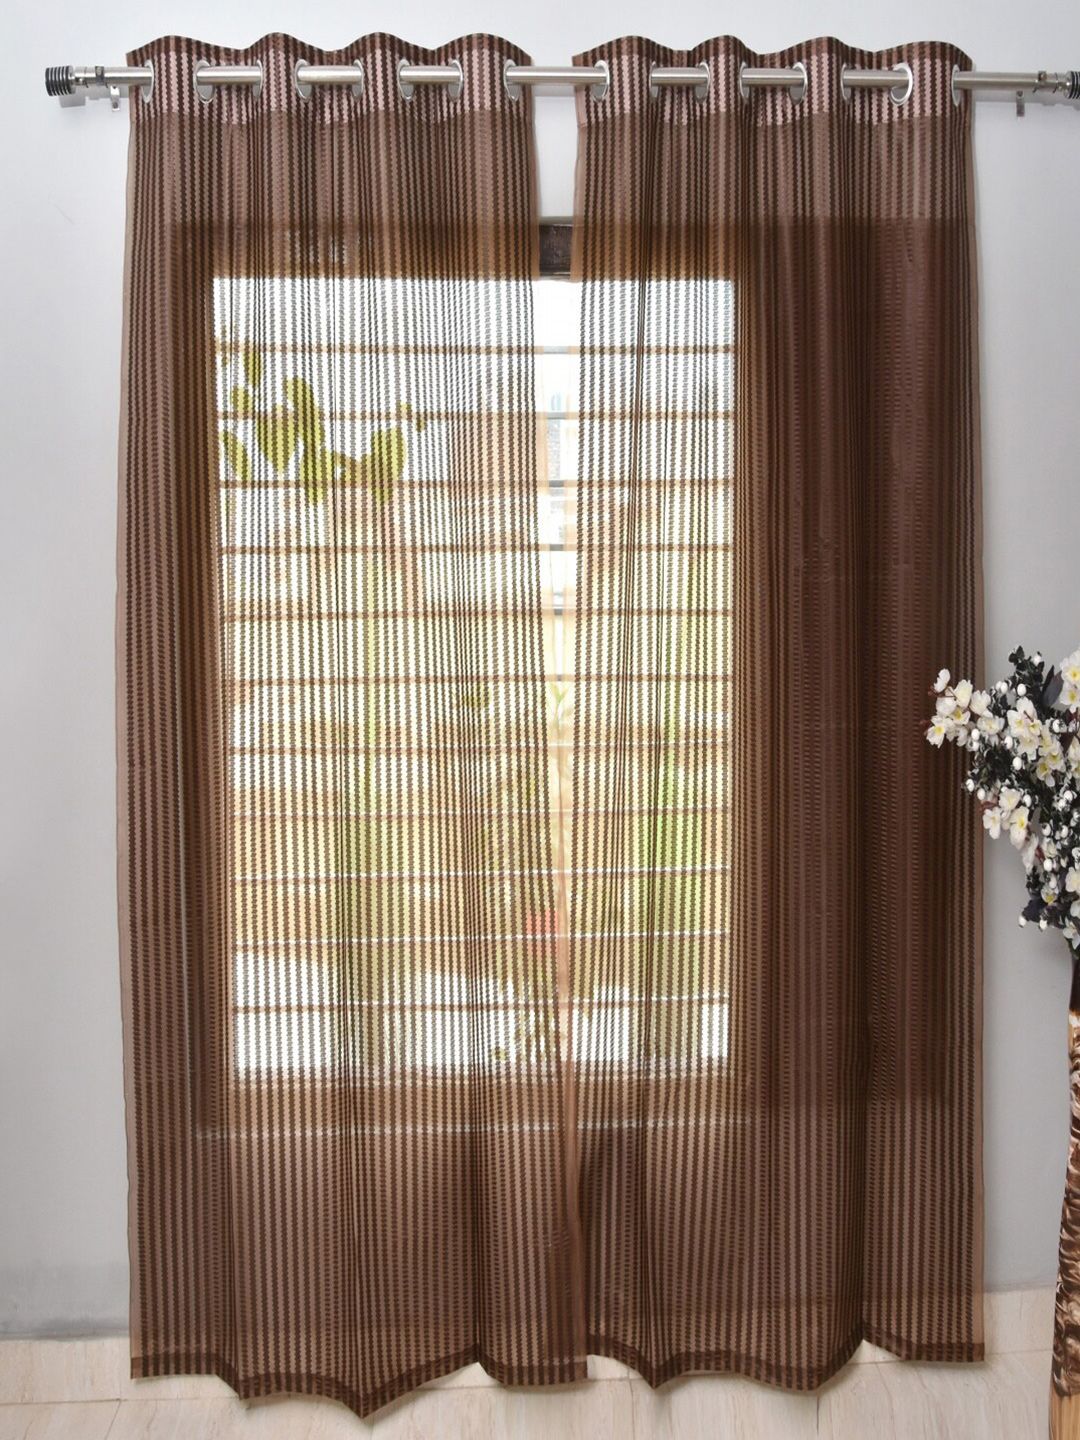 Homefab India Unisex Brown Curtains and Sheers Price in India